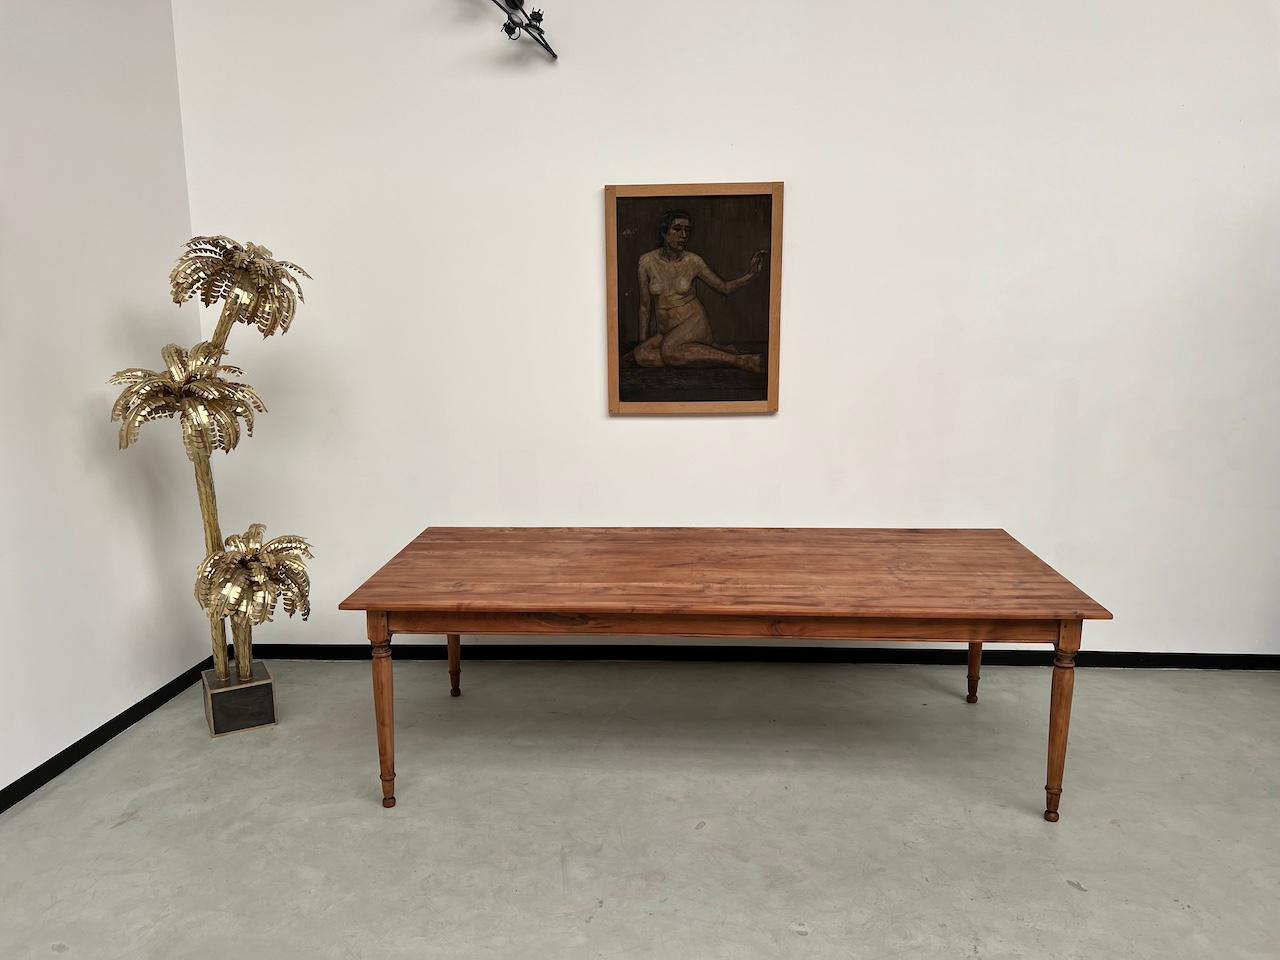 French Provincial Large solid cherry farm table, 250 x 110 cm